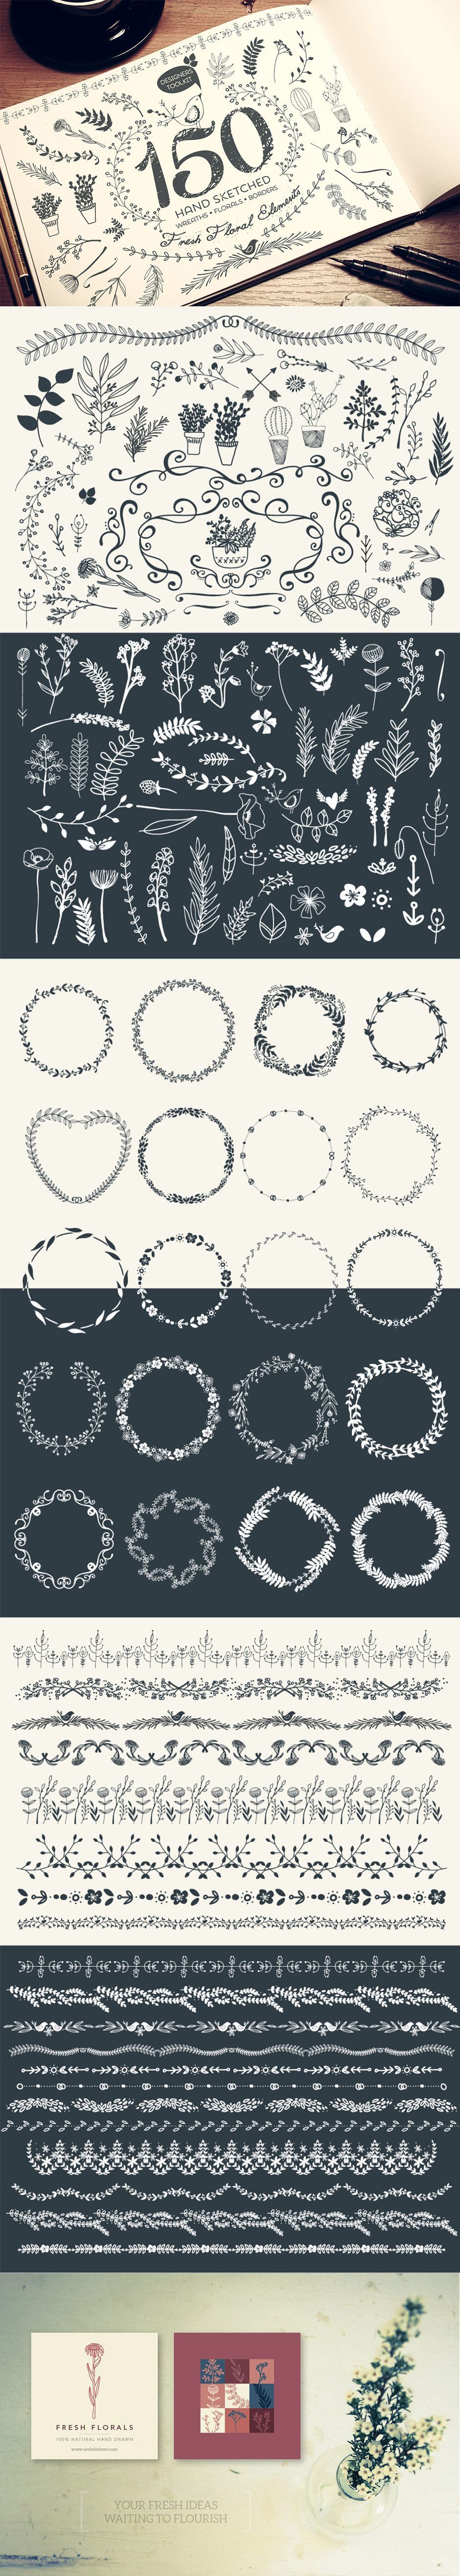 The Essential, Creative Design Arsenal (1000s of Best-Selling Resources) Just $29 – Fresh Florals Hand Drawn Megapack